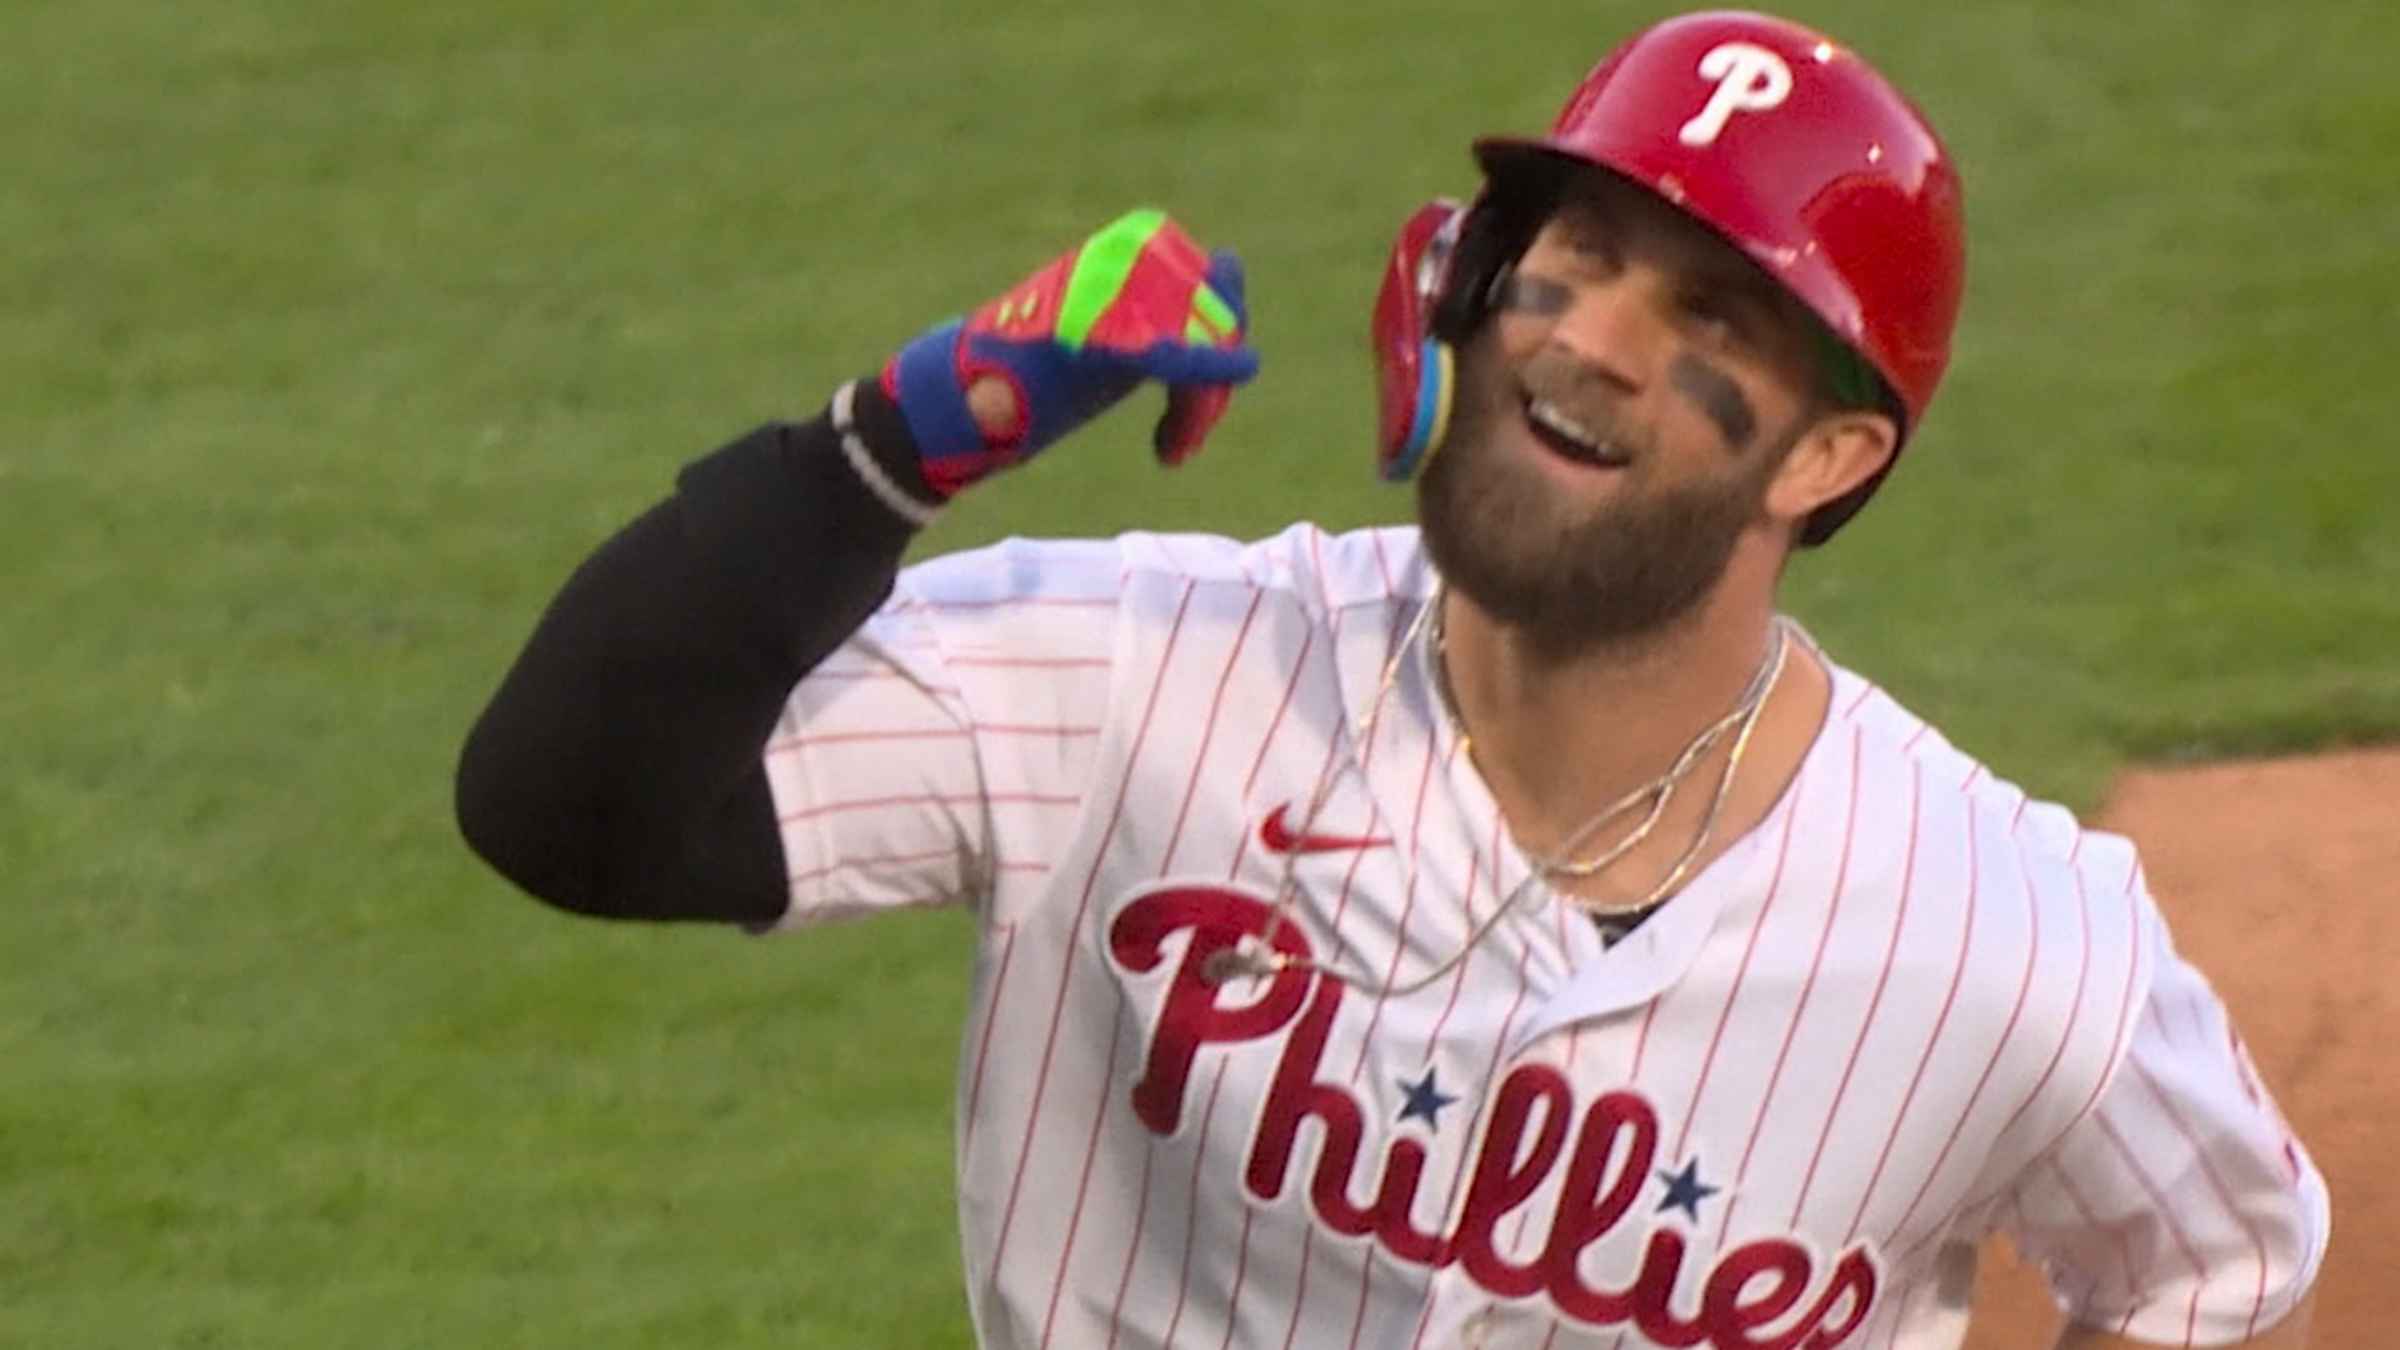 Bryce Harper crushes two home runs against the Blue Jays